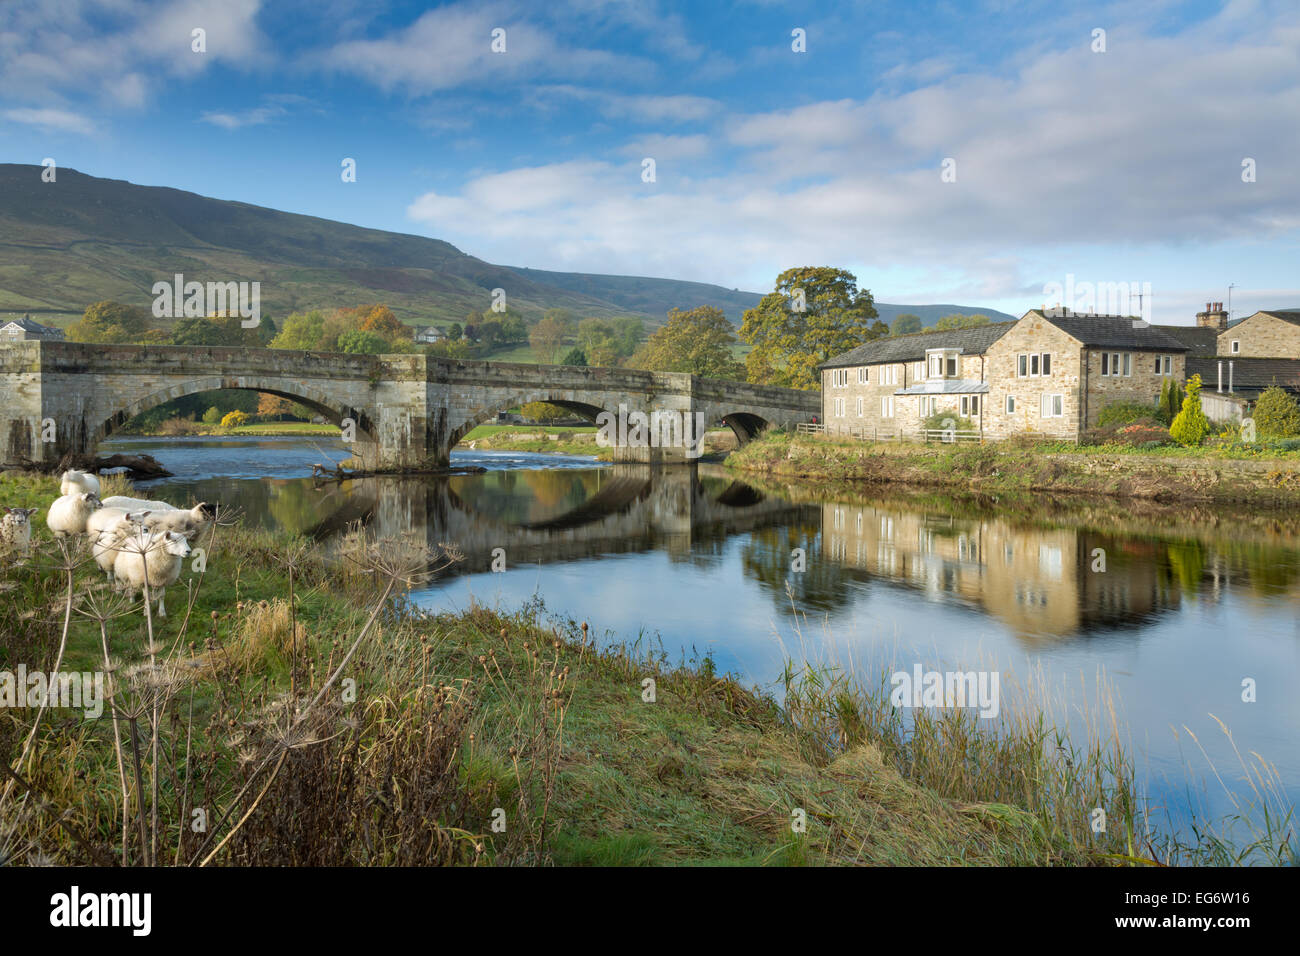 Burnsall Dorf in Wharfedale in The Yorkshire Dales, England. Stockfoto